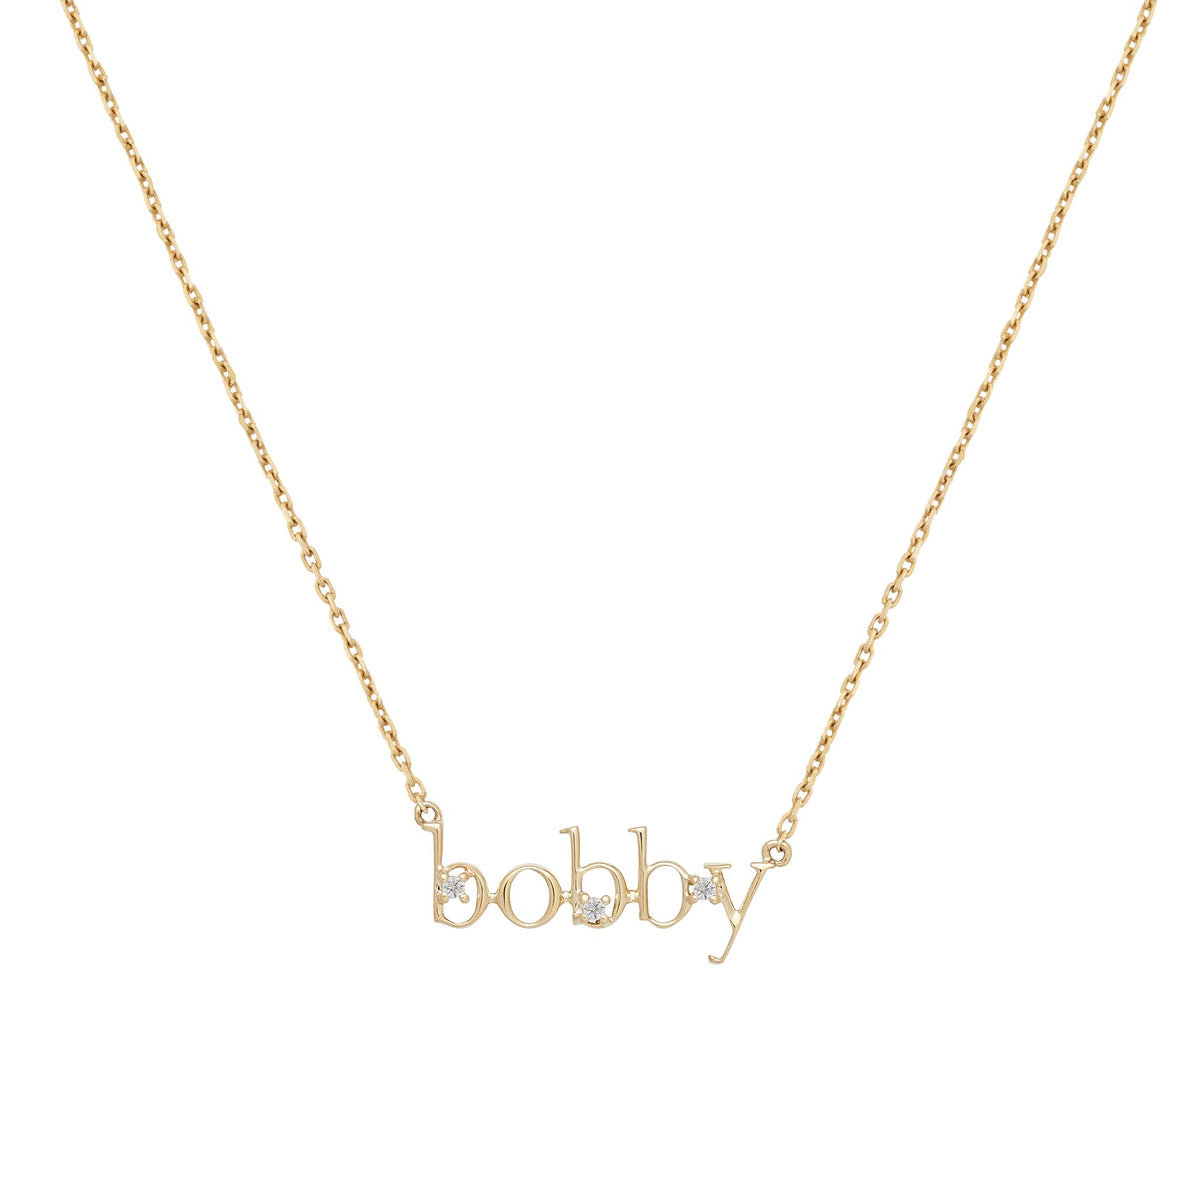 Serif Nameplate Necklace | 9K Solid Gold